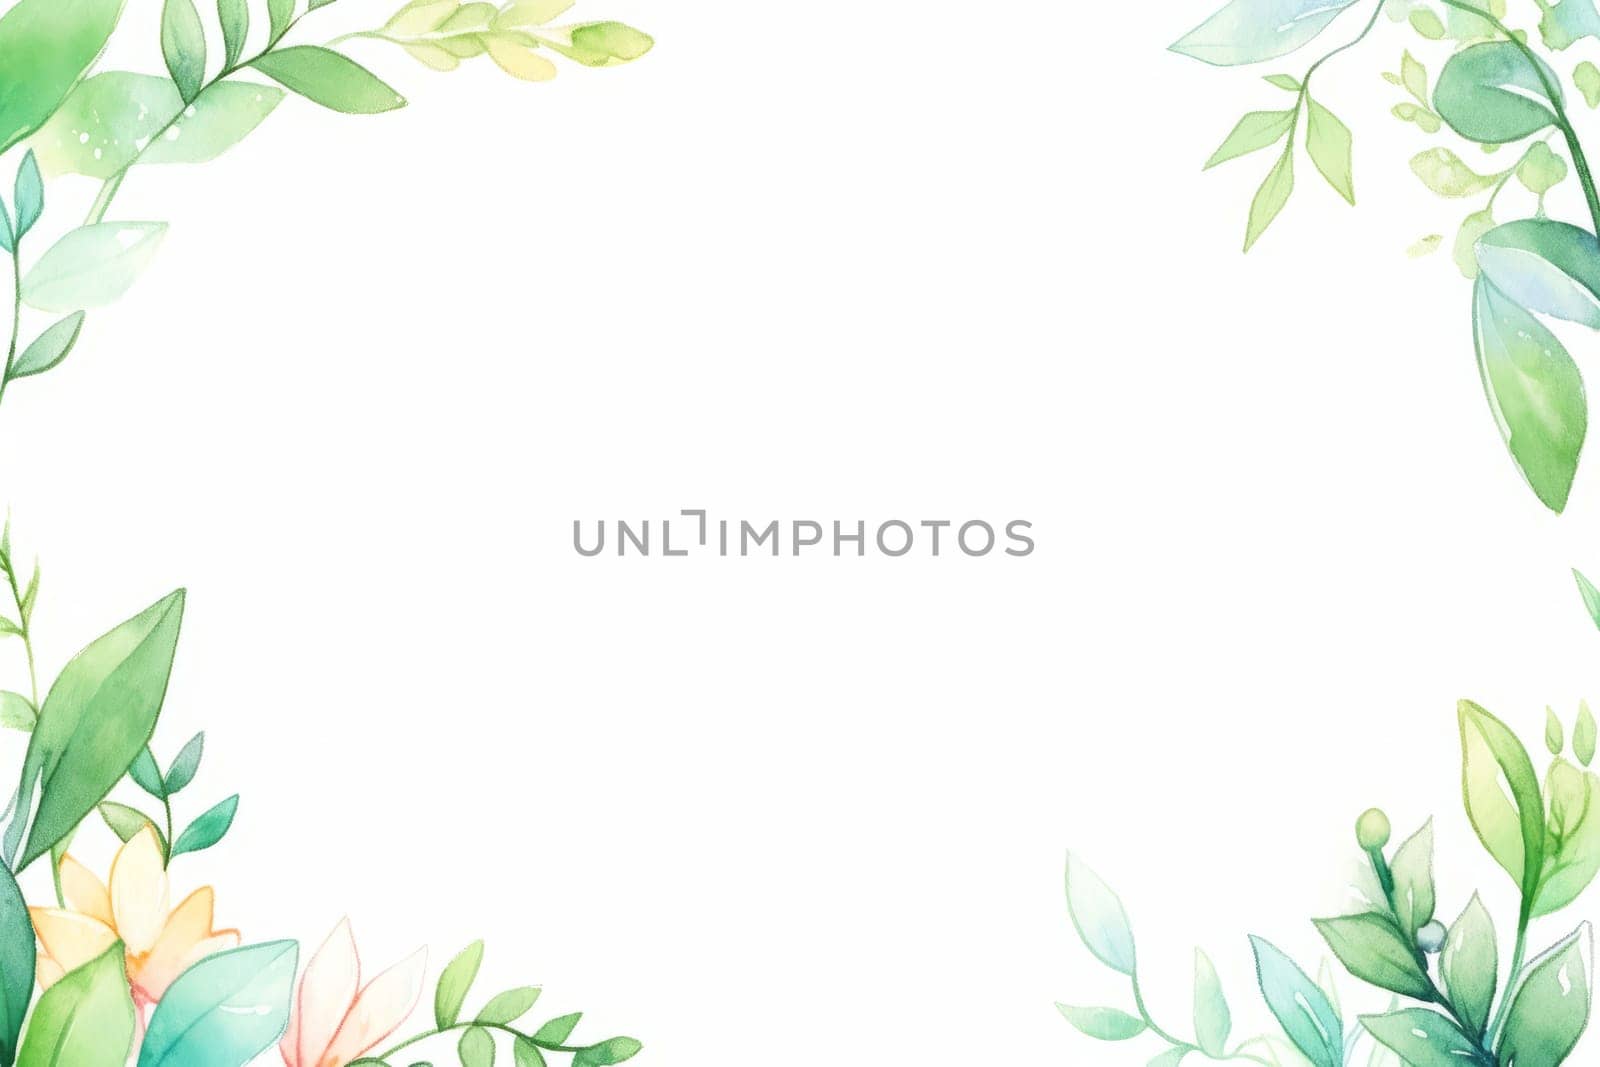 Watercolor hand painted green floral banner or frame, background illustration